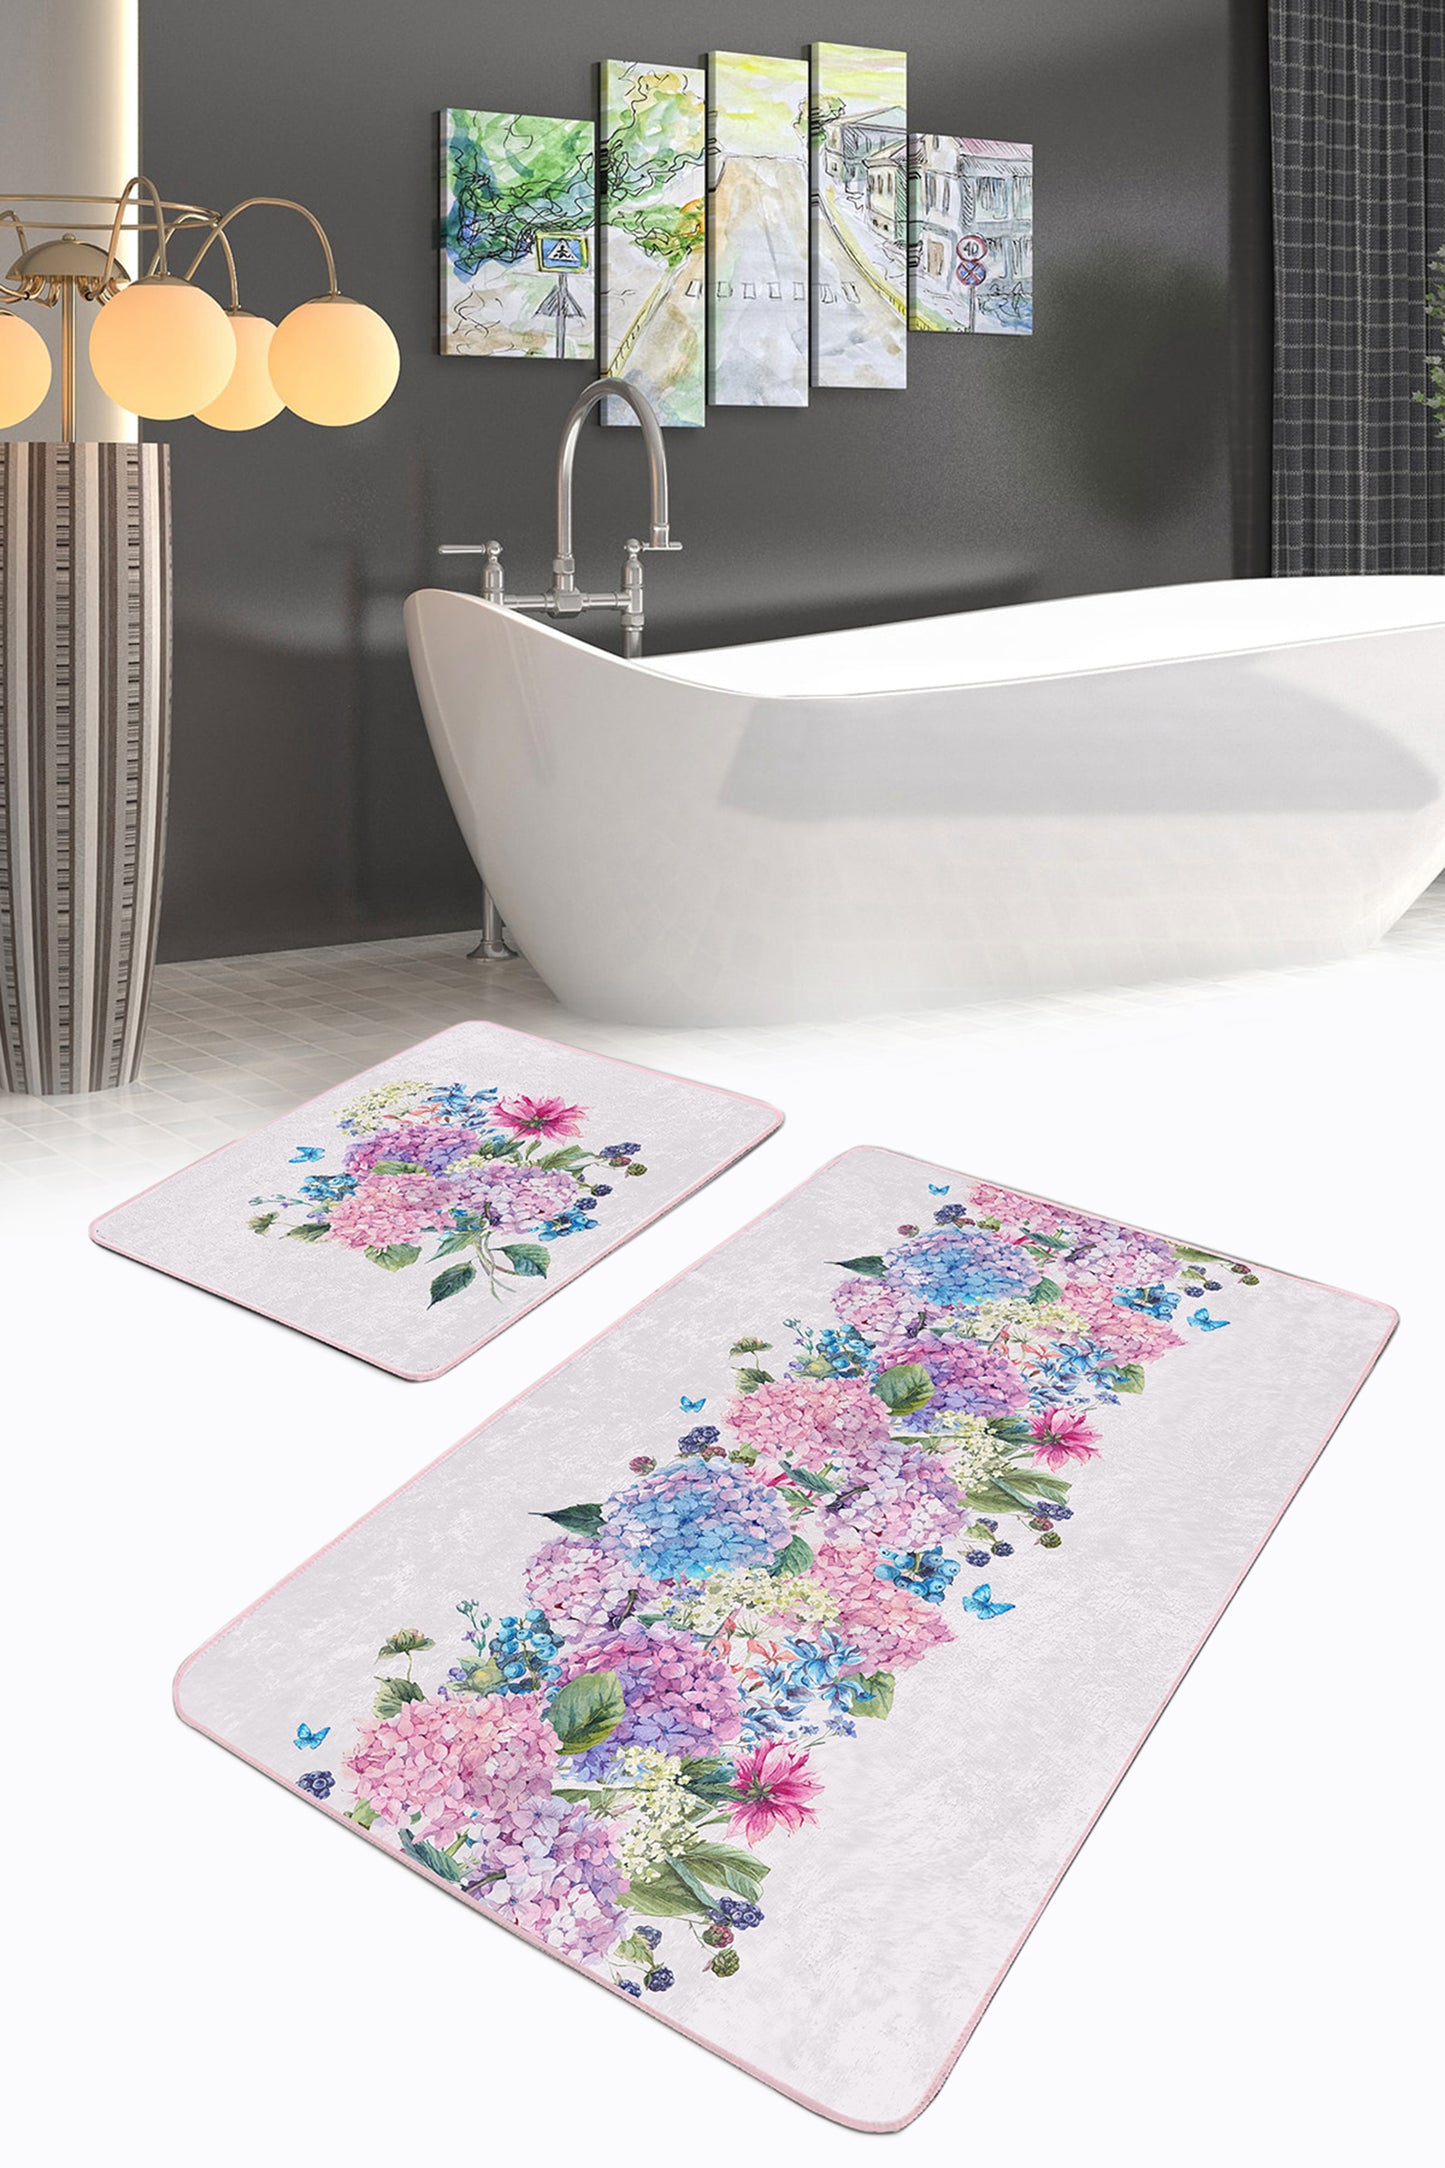 Close-up of the Delicate Floral Patterns on the Bath Mat Set